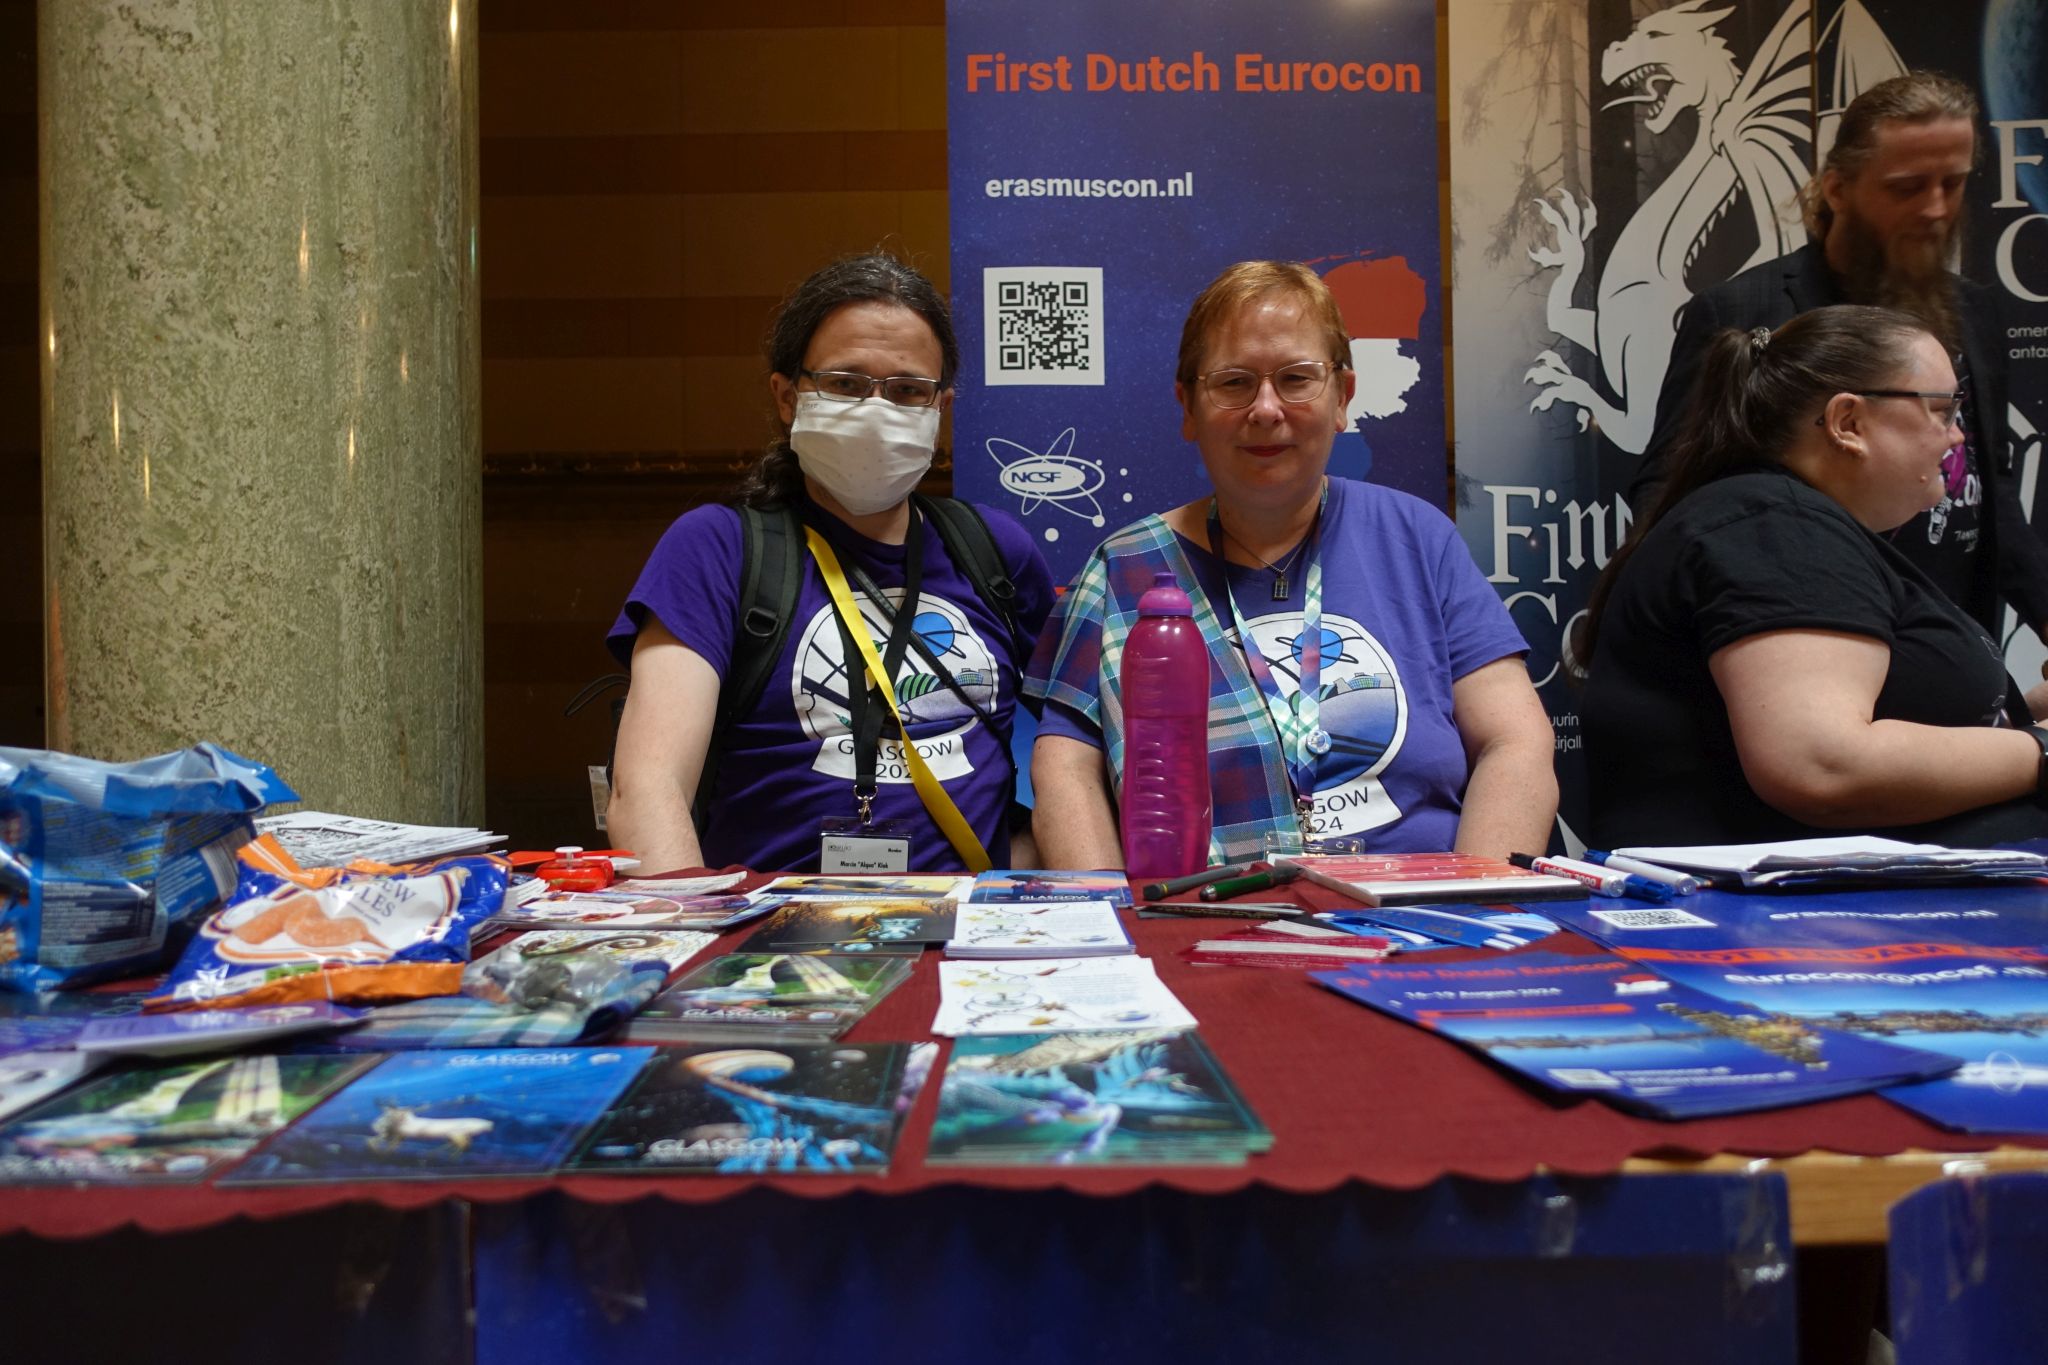 Two people posing for a picture behind a table with convention merchandise on it. Both are wearing purple r-shirts with Glasgow 2024 logo. Next to them there are two more people.